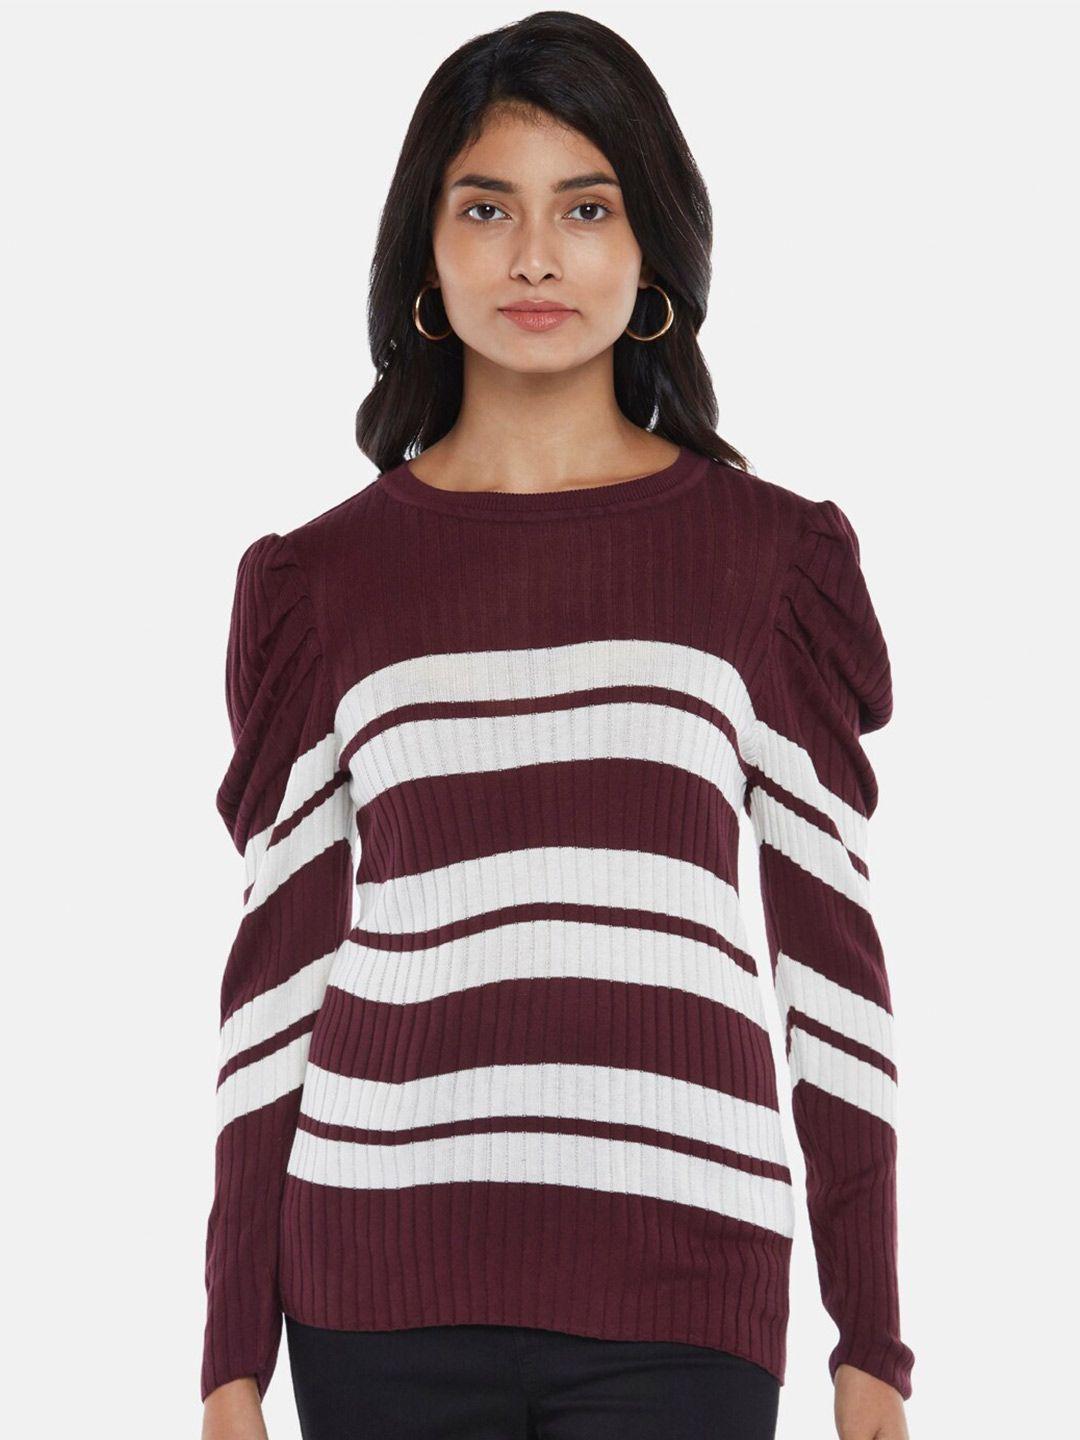 honey by pantaloons women burgundy & white striped pullover sweater